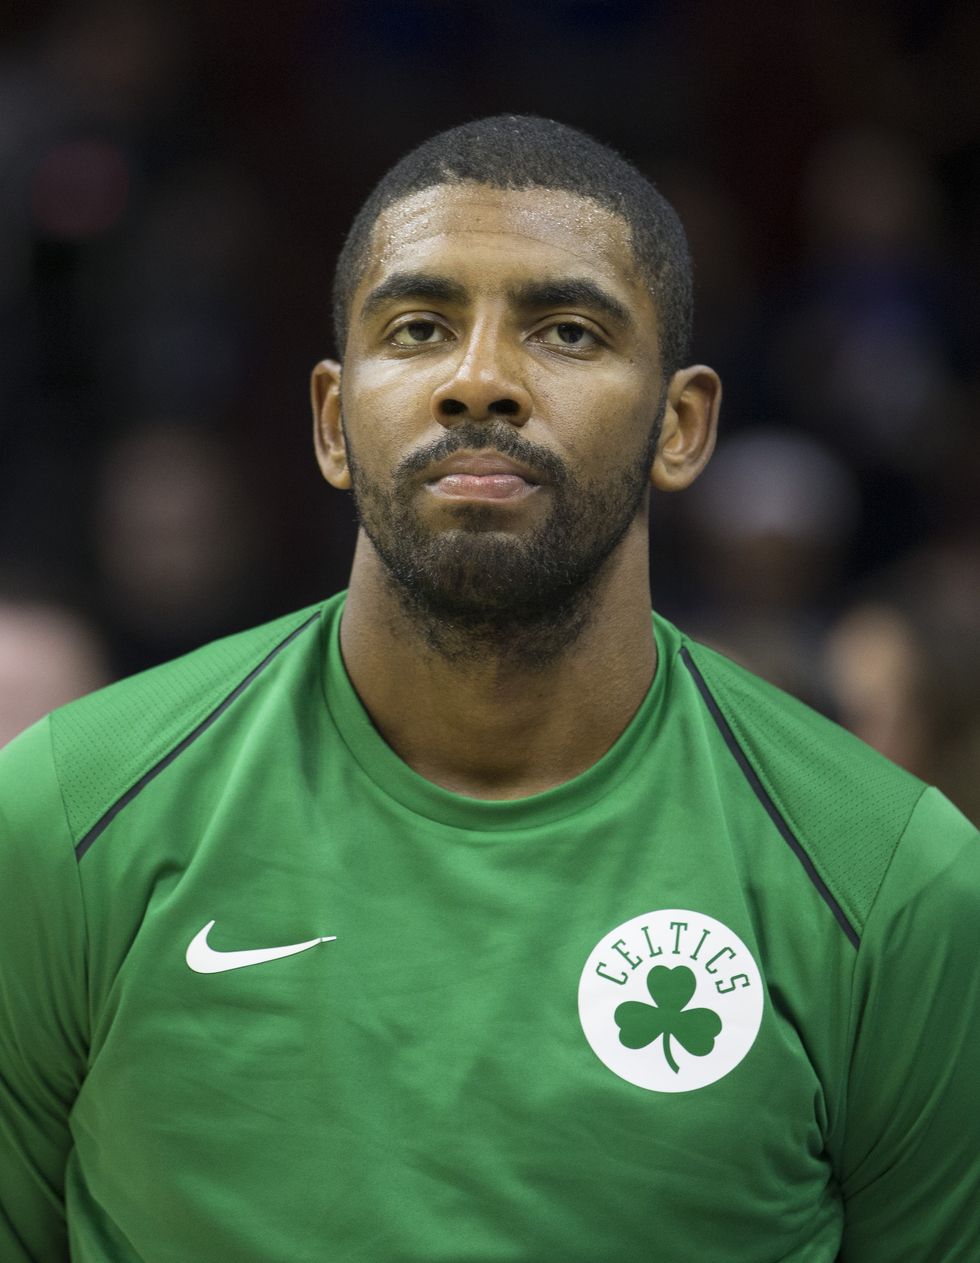 Kyrie Irving Photo